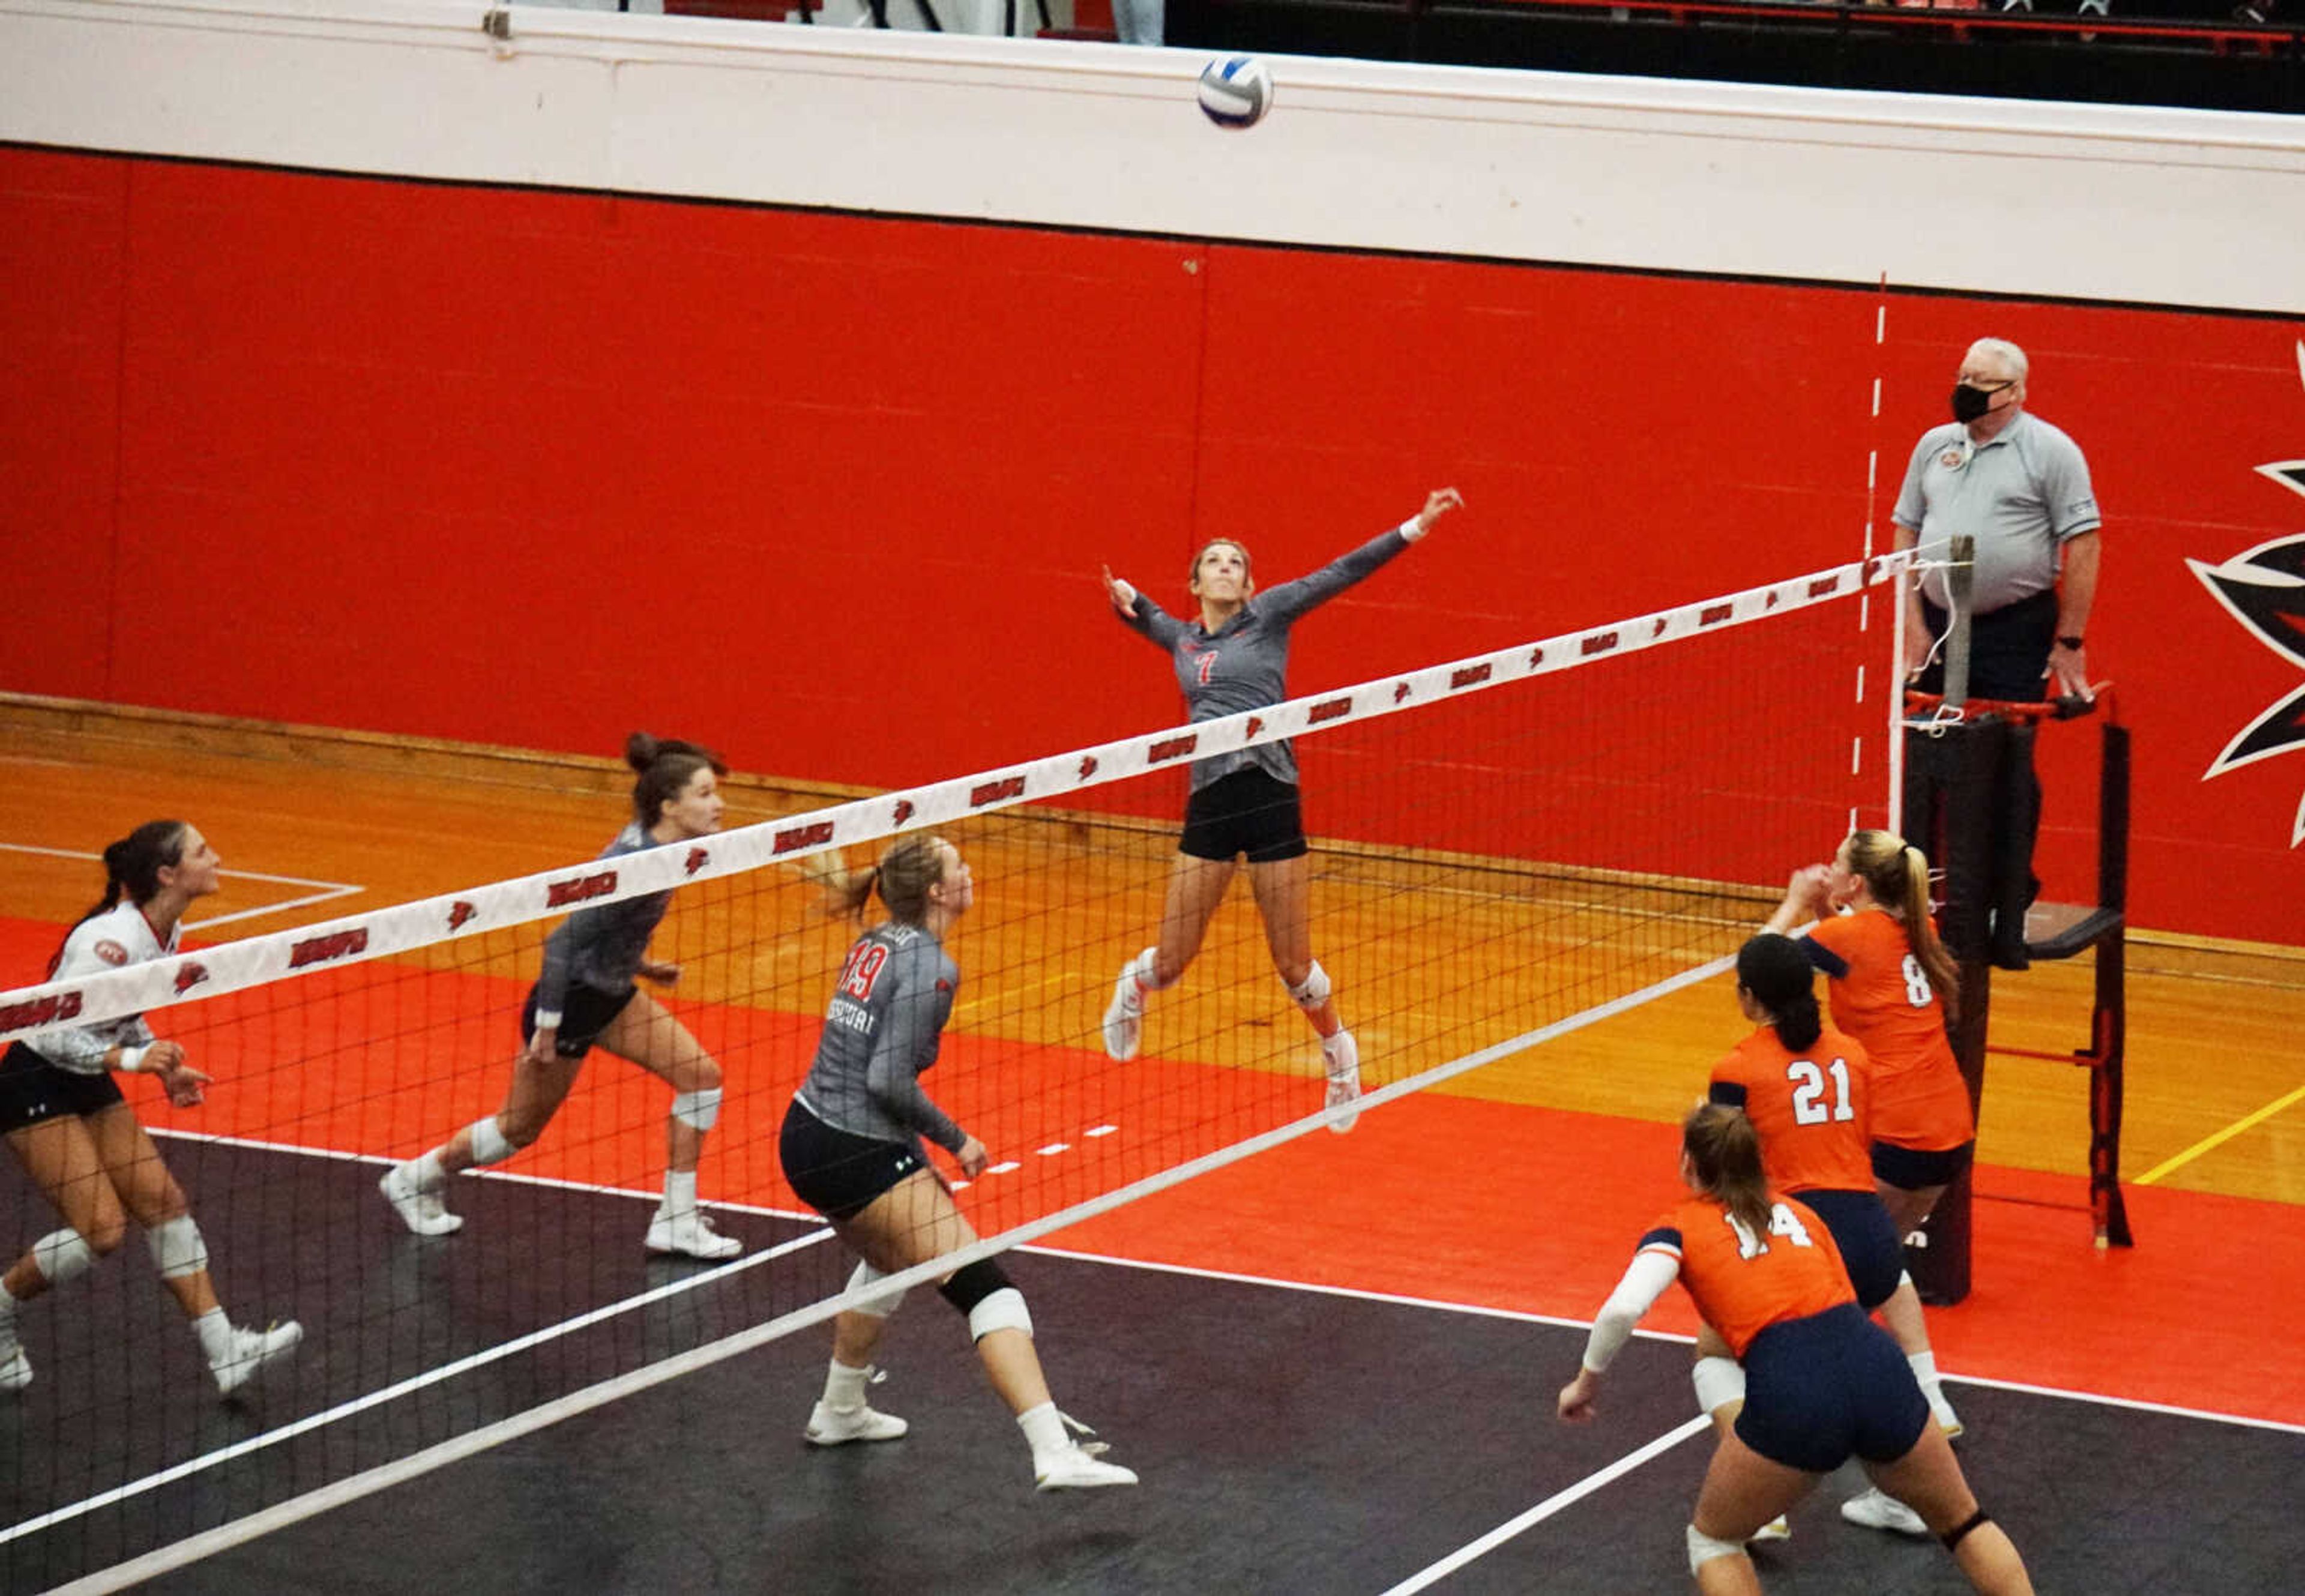 Senior outside hitter Laney Malloy goes up for a kill during Southeast's five set loss to UT Martin on Sept. 29 at Houck Field House in Cape Girardeau.